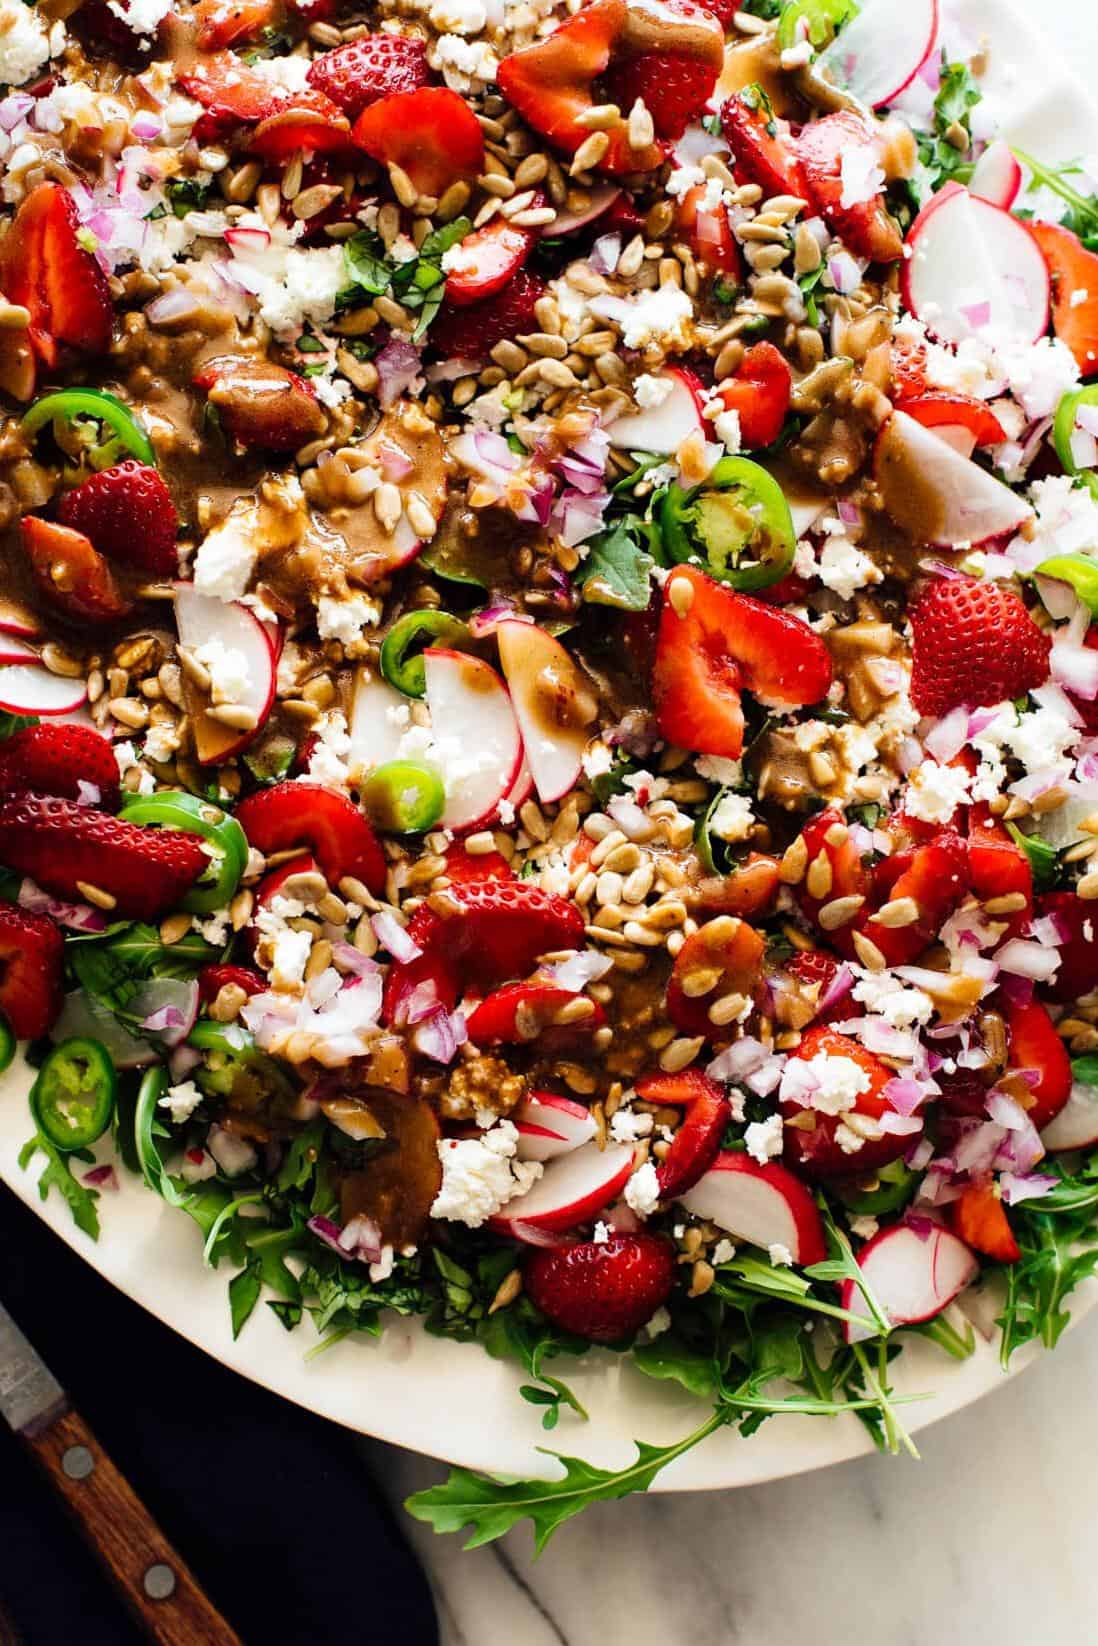  Who says salads can't be festive? This snow salad is perfect for the holiday season.